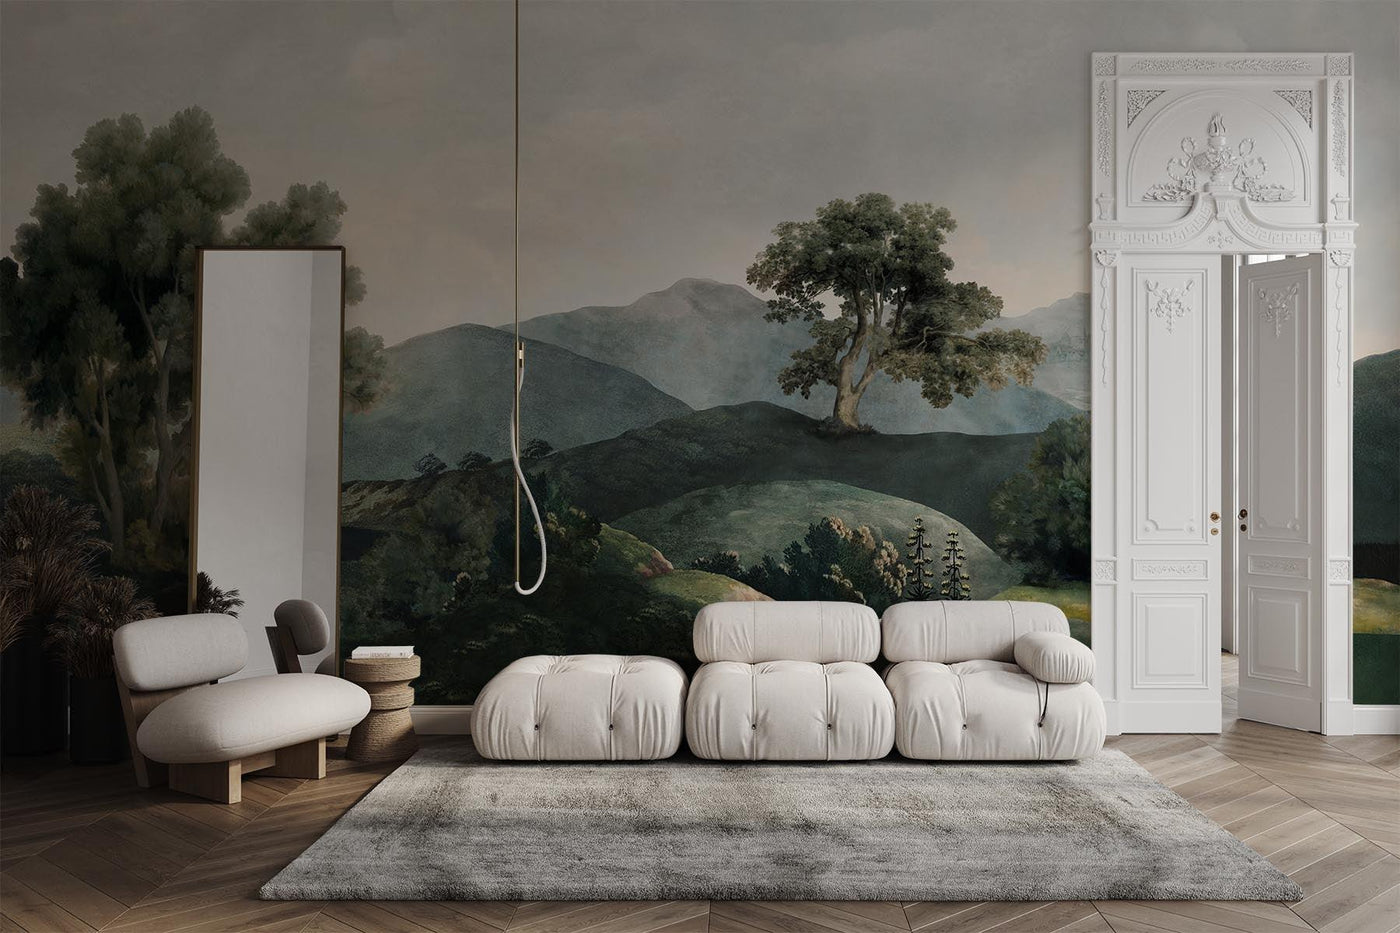 Vintage Countryside Painting Wall Mural Reusable Wall Paper  Etsy   Countryside wallpaper Wall painting Wall murals